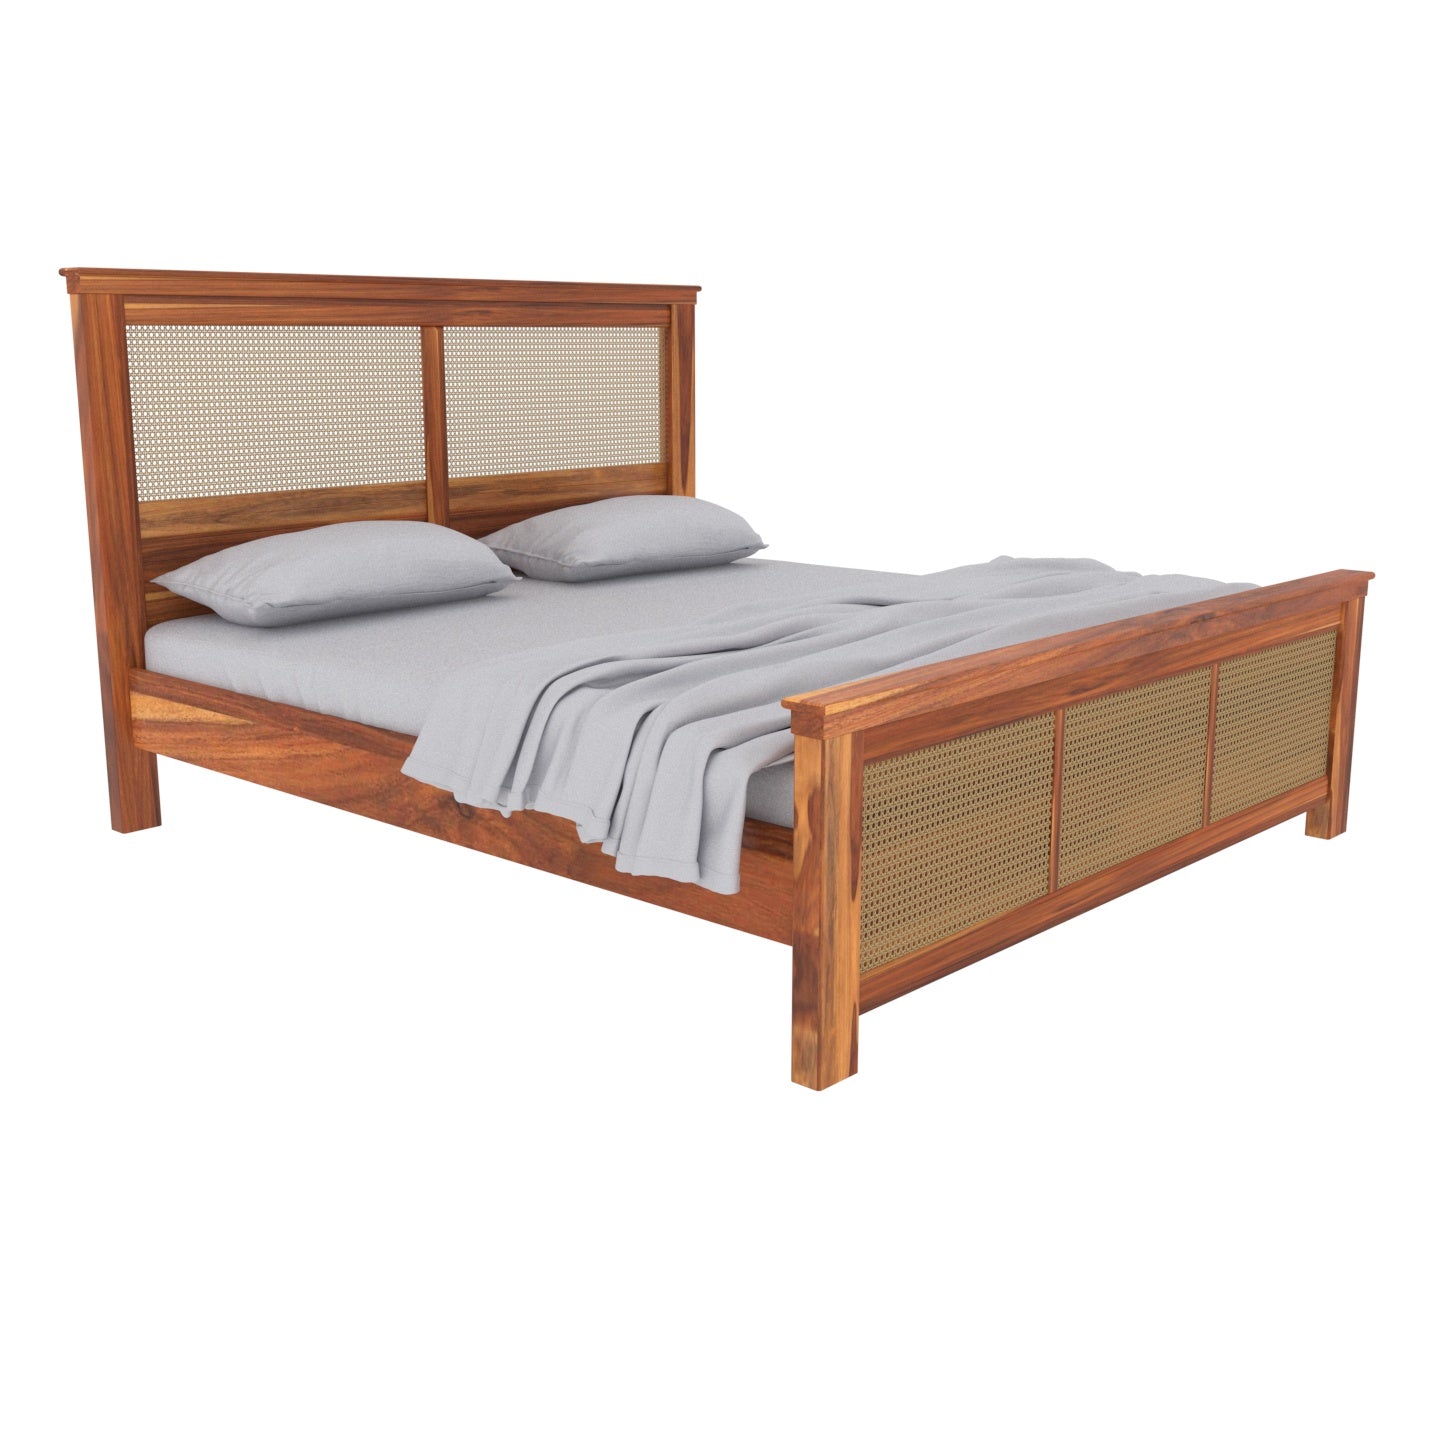 Majestic Modern Wooden Bed with Modern Arm Chair and Soft Small Seating Couch Bedroom Furniture Sets